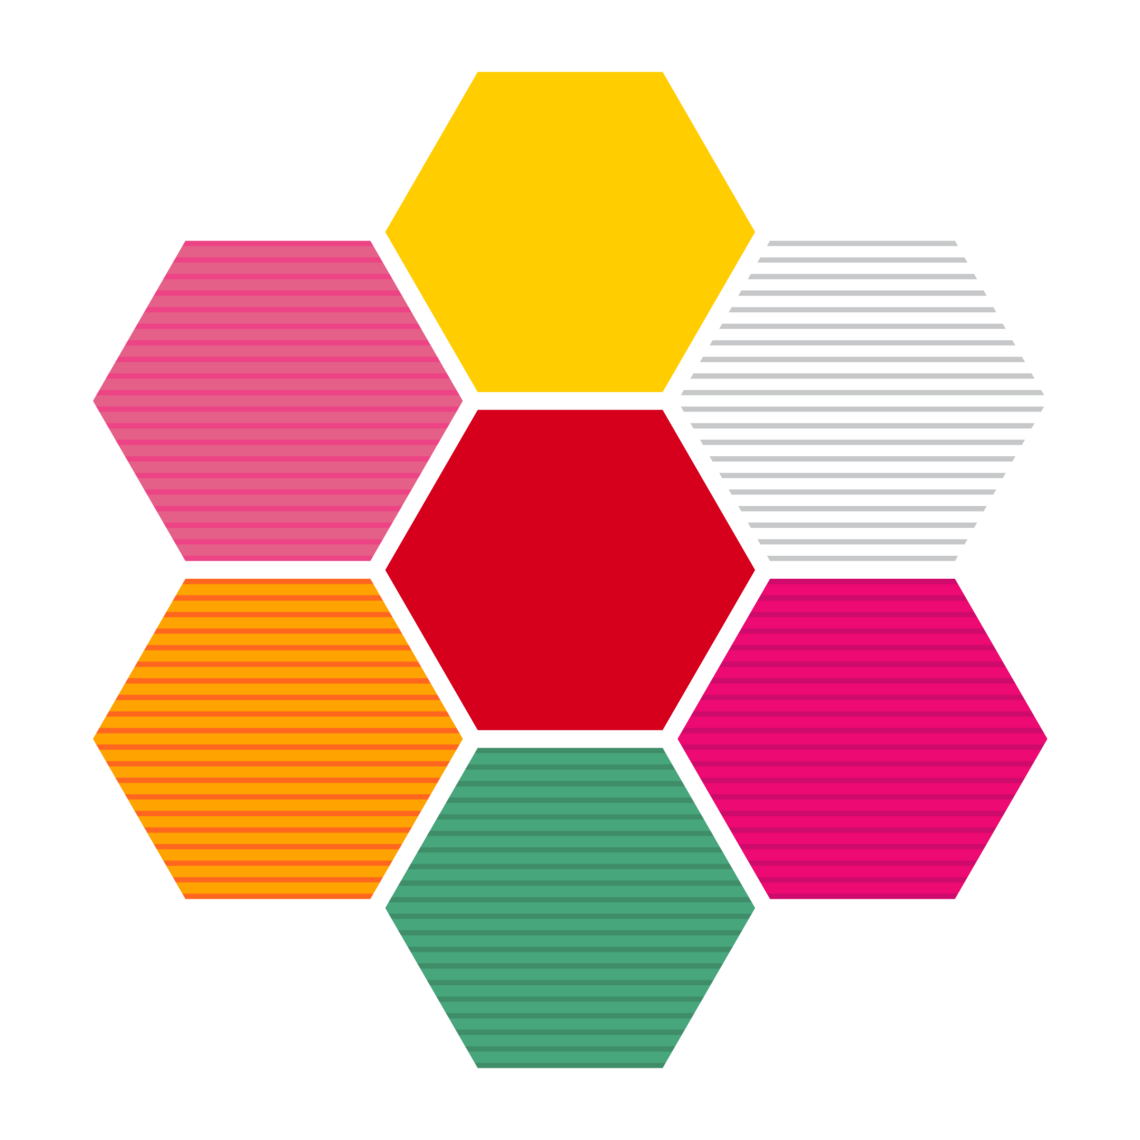 UCeed unique Identifier - 6 hexagons, two pink, one yellow, one orange, one green and one red